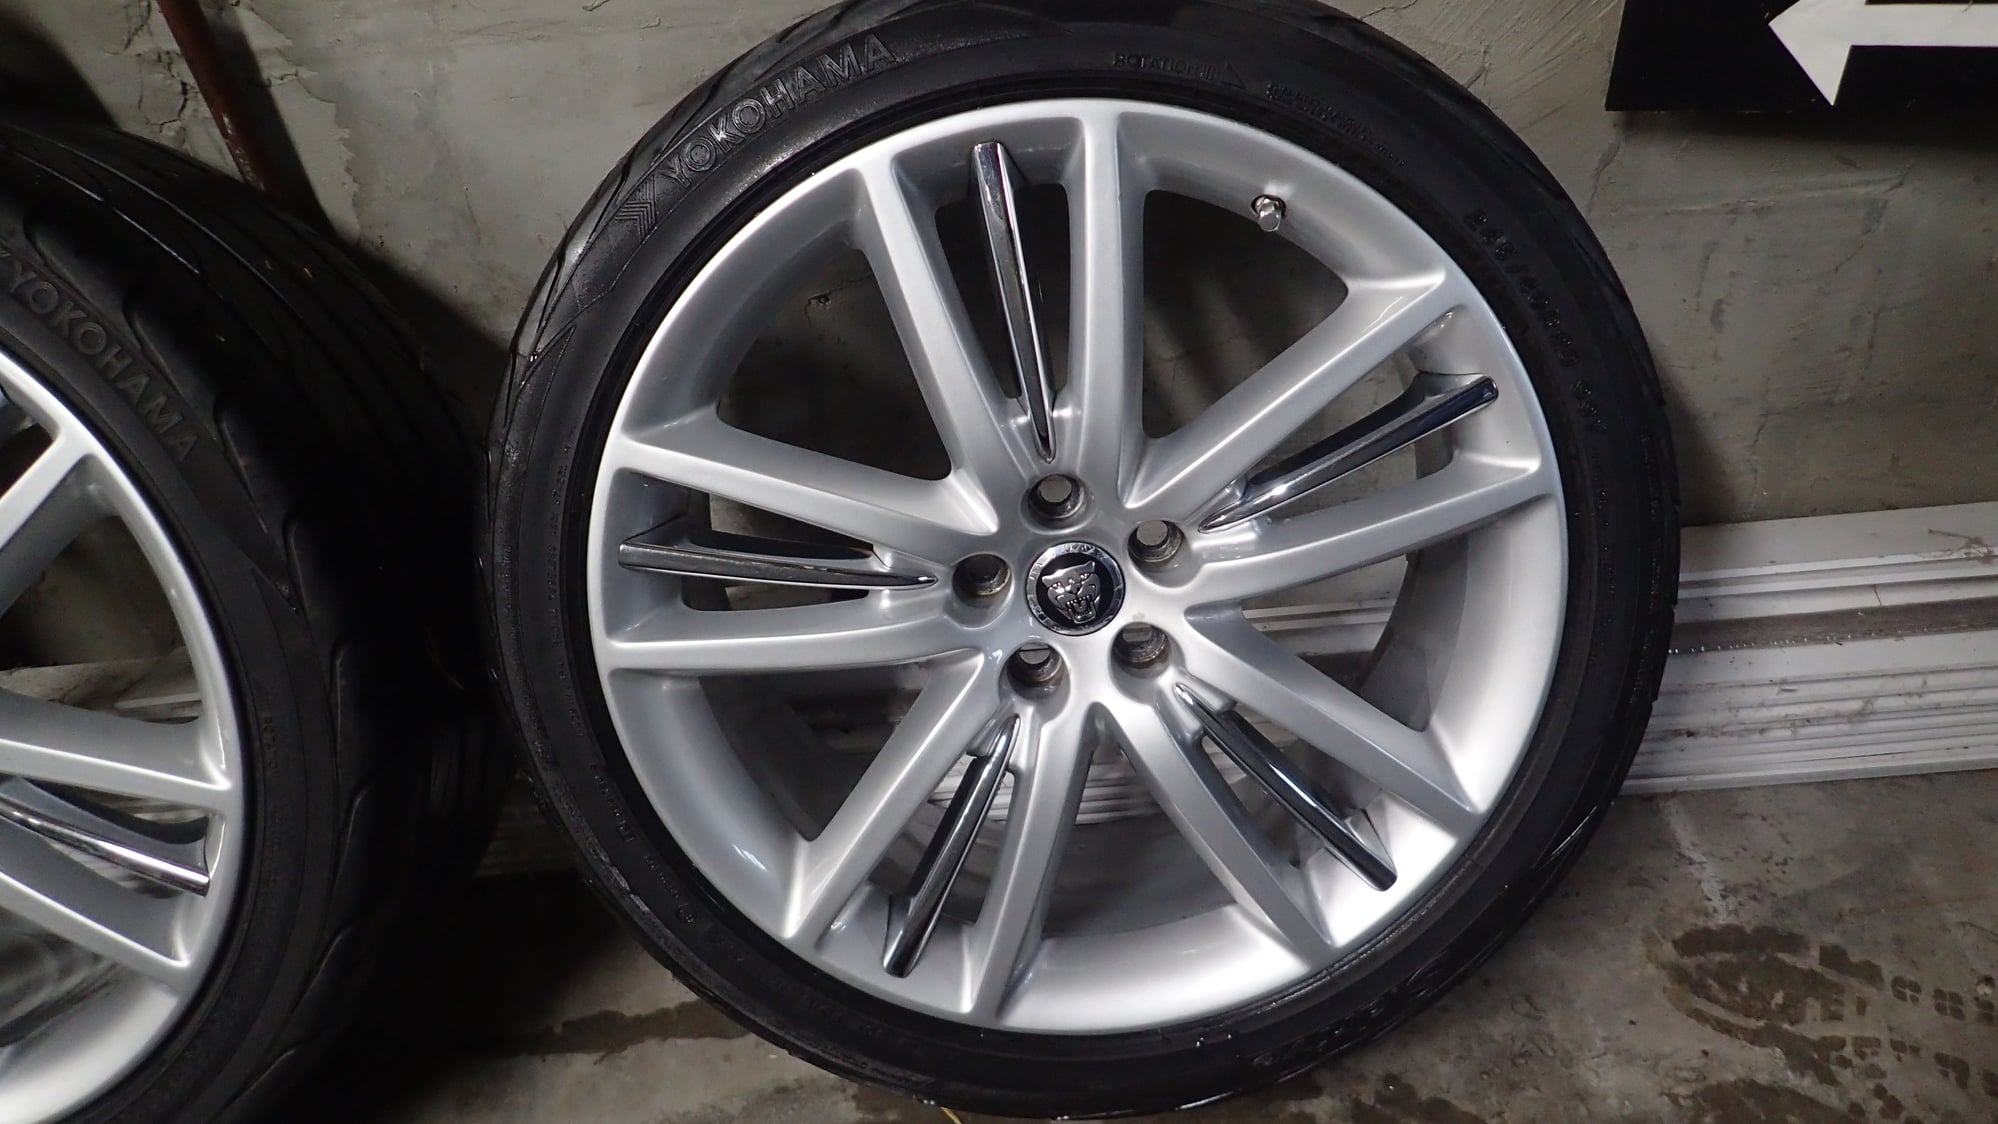 Wheels and Tires/Axles - 20" Selena wheels, staggered set (with chrome blades) EXC condition - Used - 2009 to 2015 Jaguar XF - Oak Ridge, TN 37830, United States